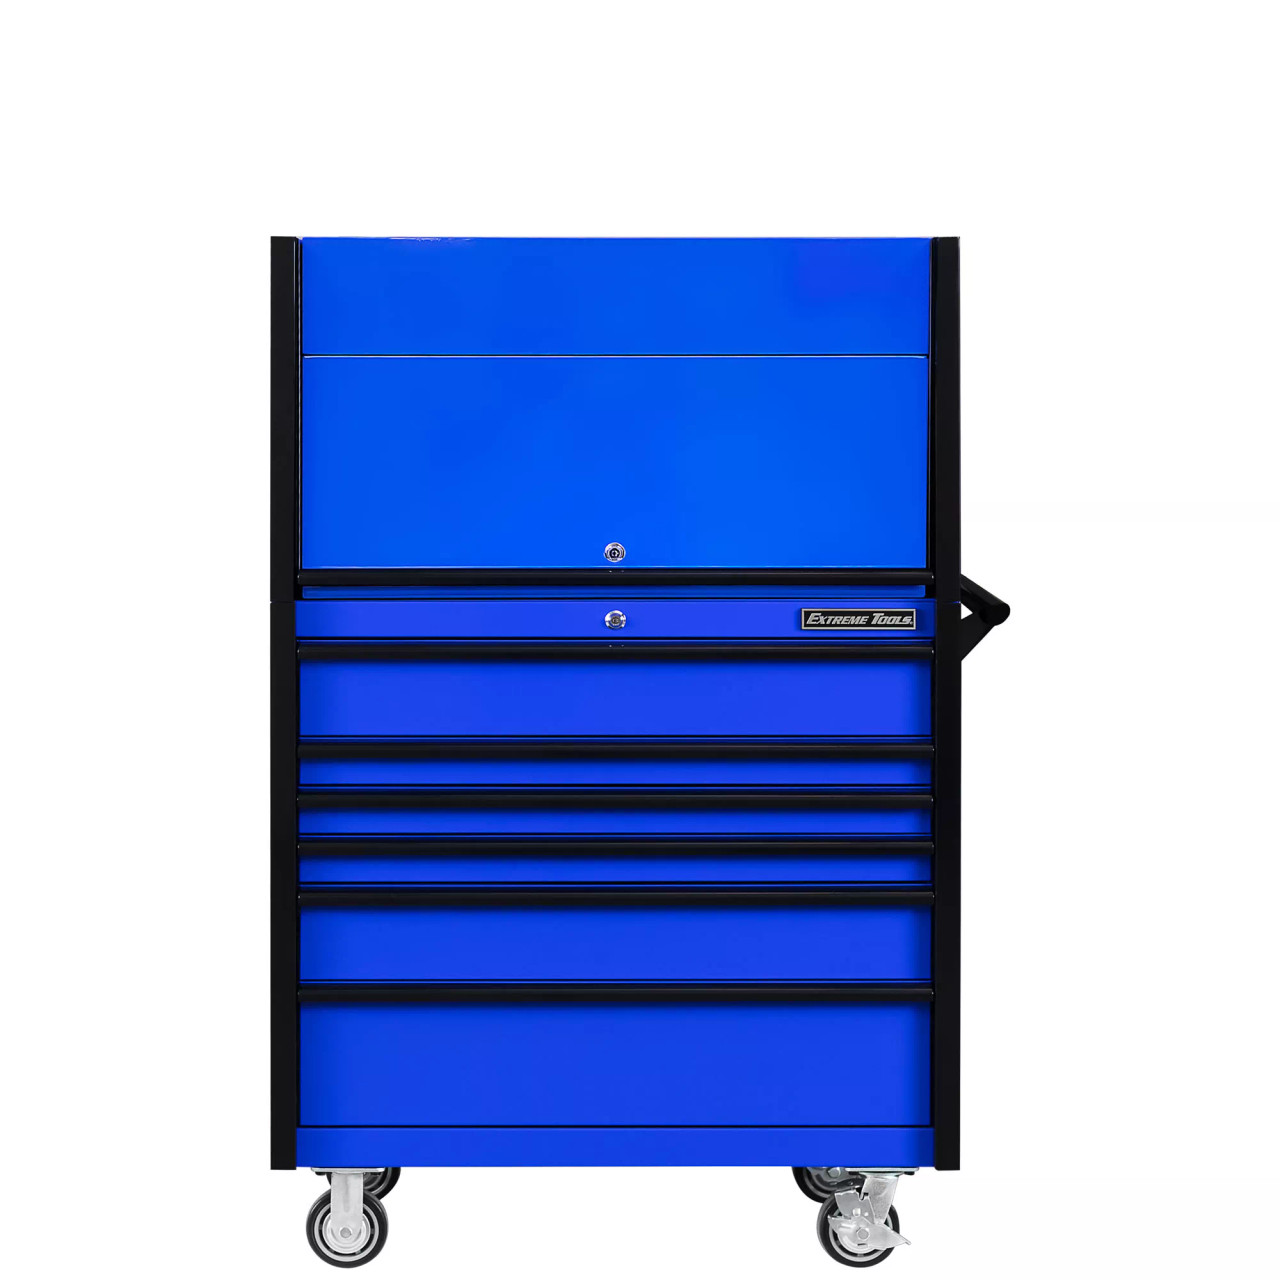 Extreme Tools DX4107HRUK 41" Power Workstation and Roller Cabinet Combo - Blue with Black Pulls